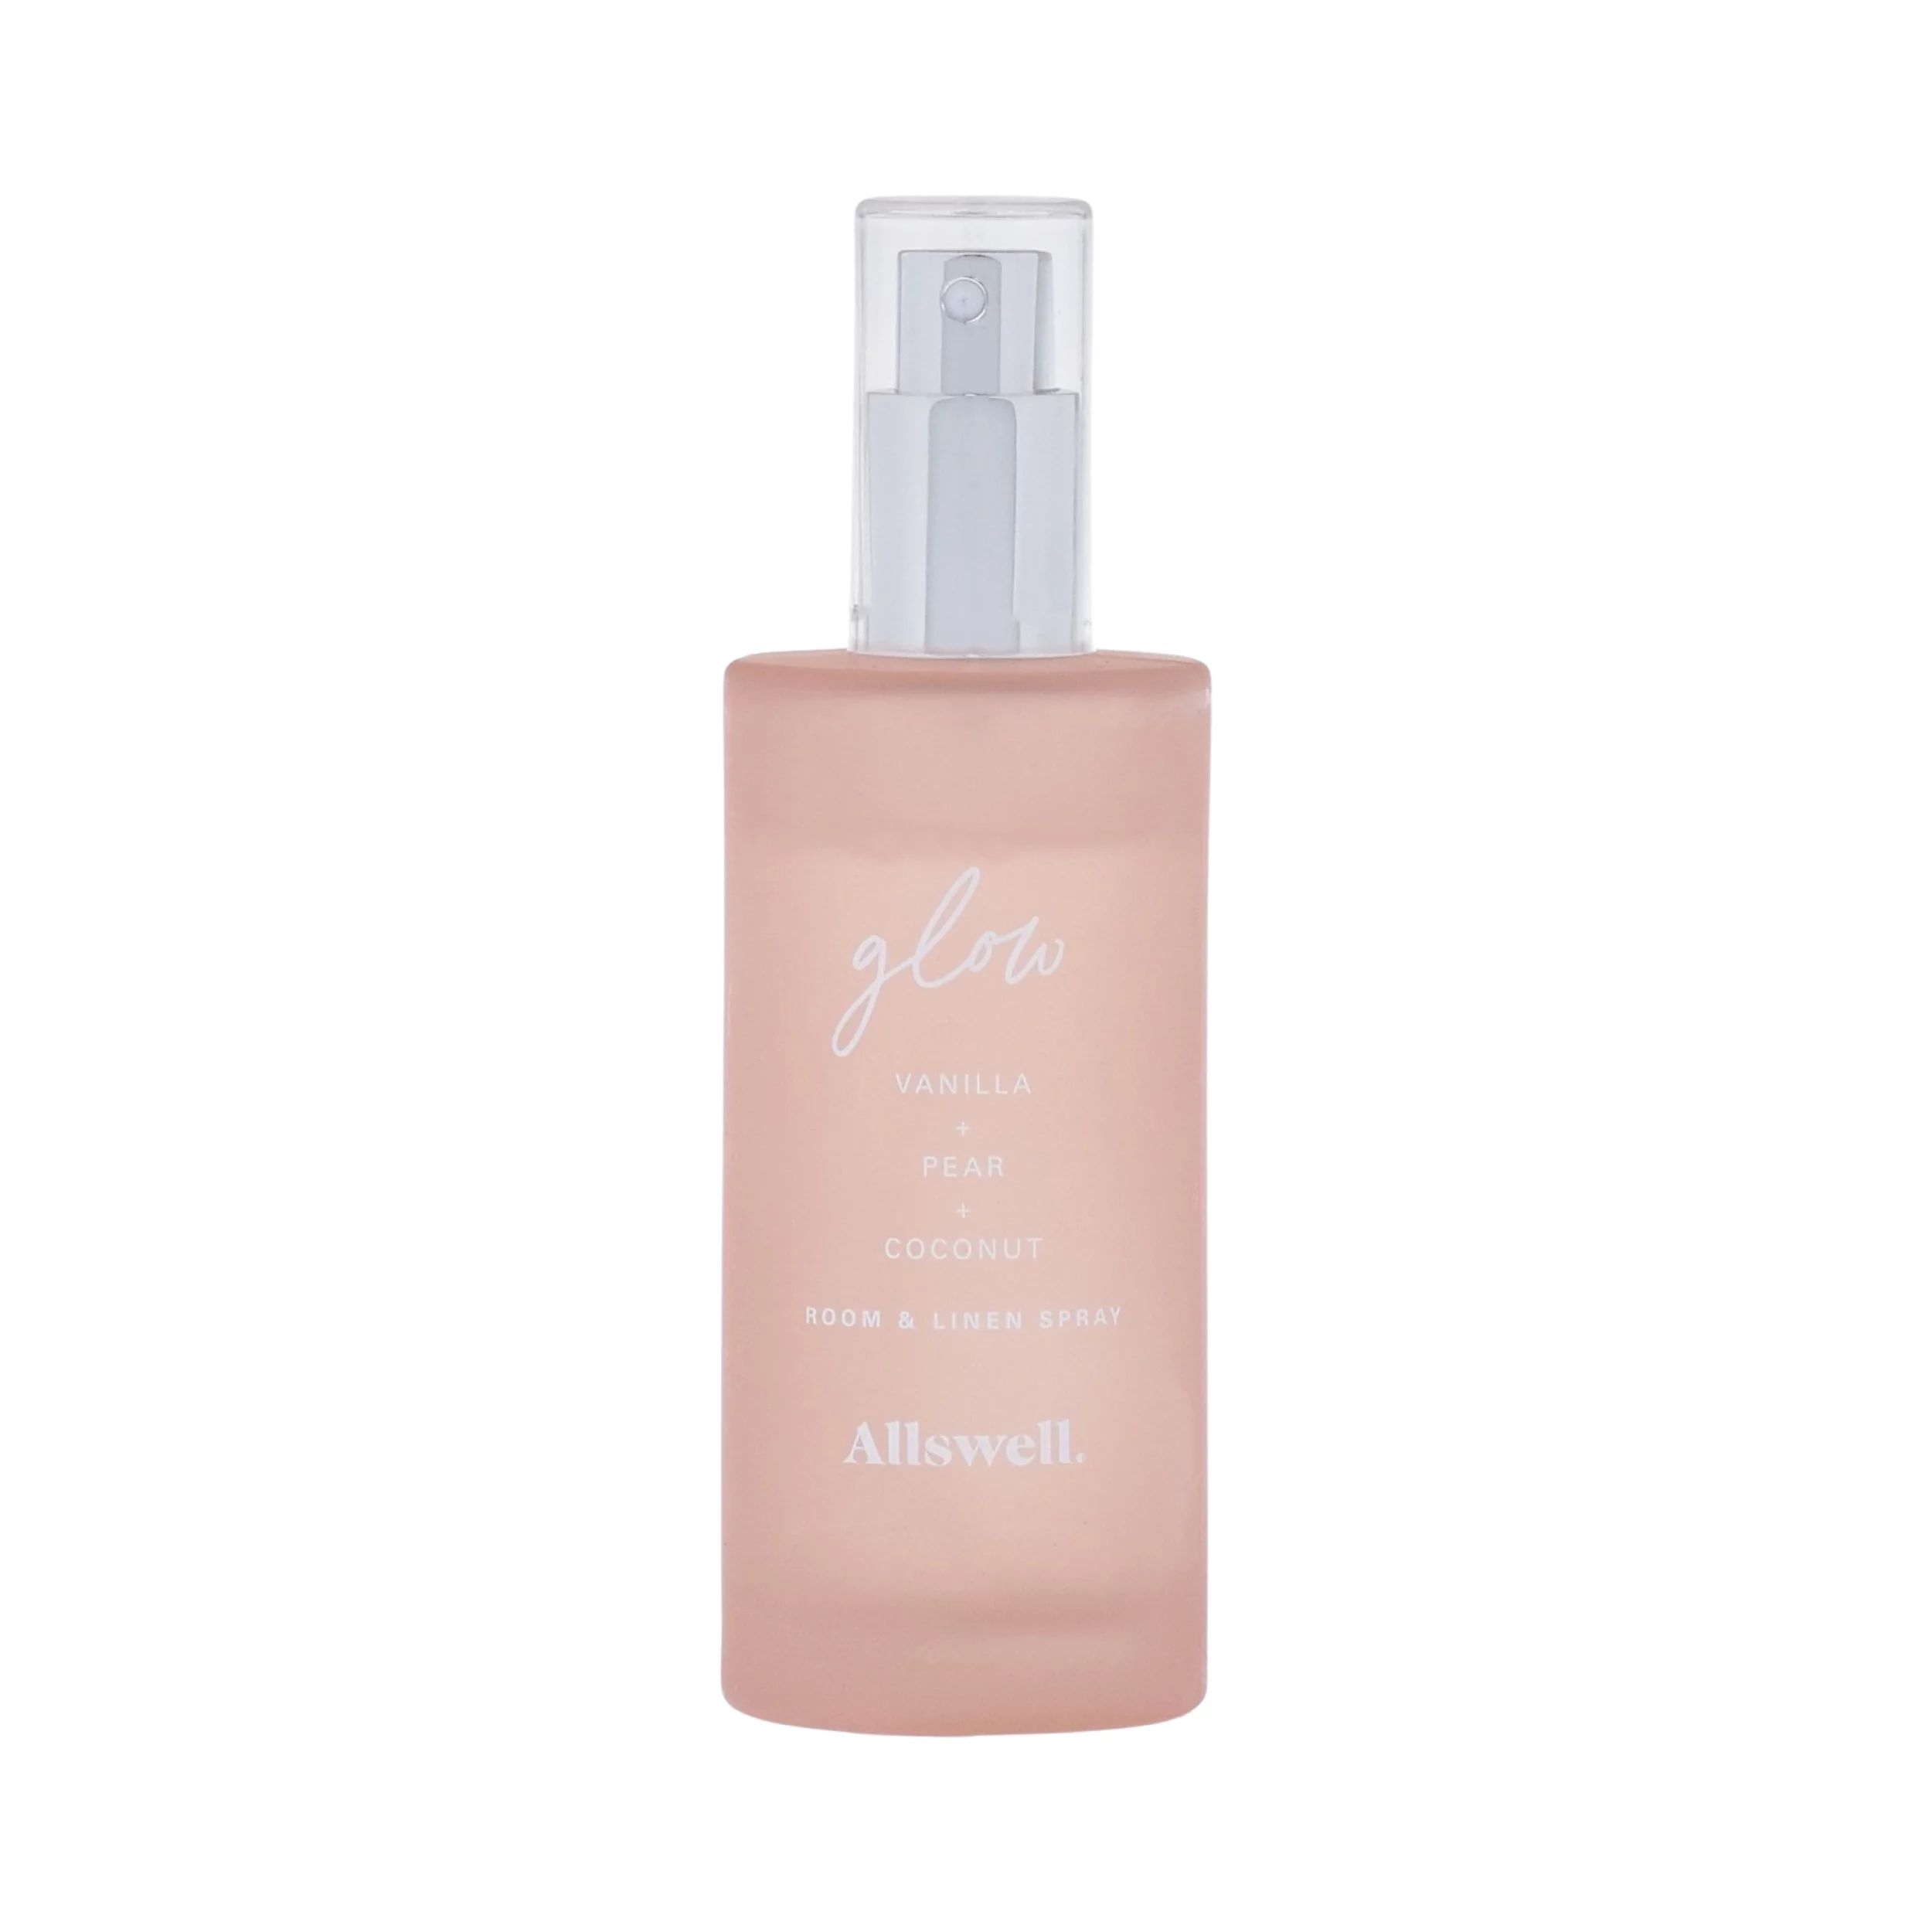 Glow (Vanilla + Pear + Coconut) | Pink - Allswell Printed Straight Sided Cylinder Room Spray 100m... | Walmart (US)